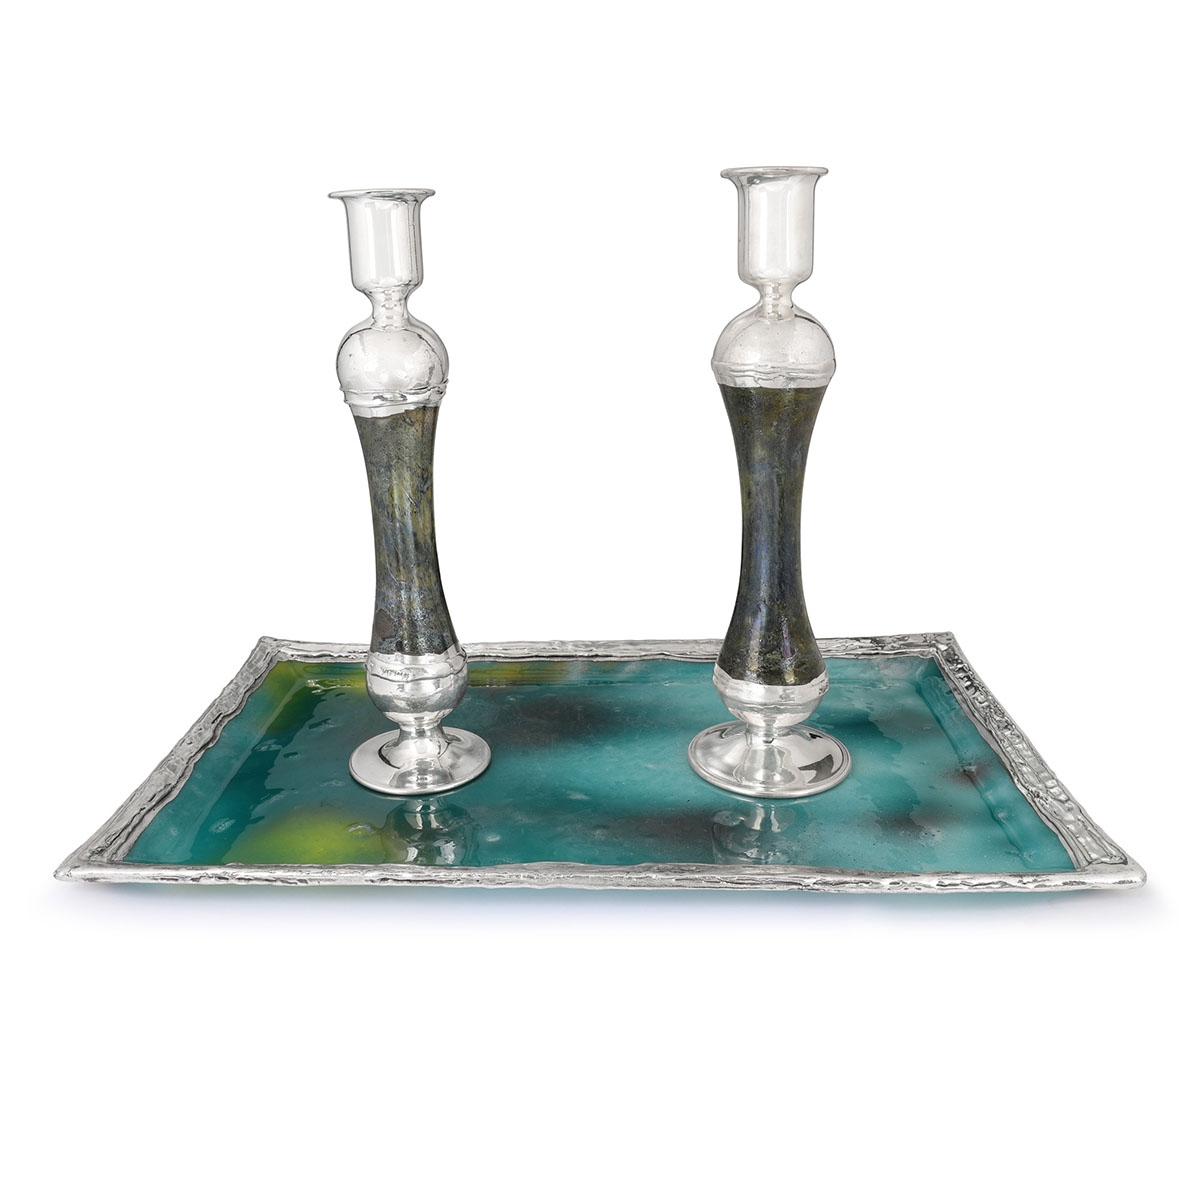 Refined Large Sterling Silver-Plated Glass Shabbat Candlesticks (Shades of Green) - 1